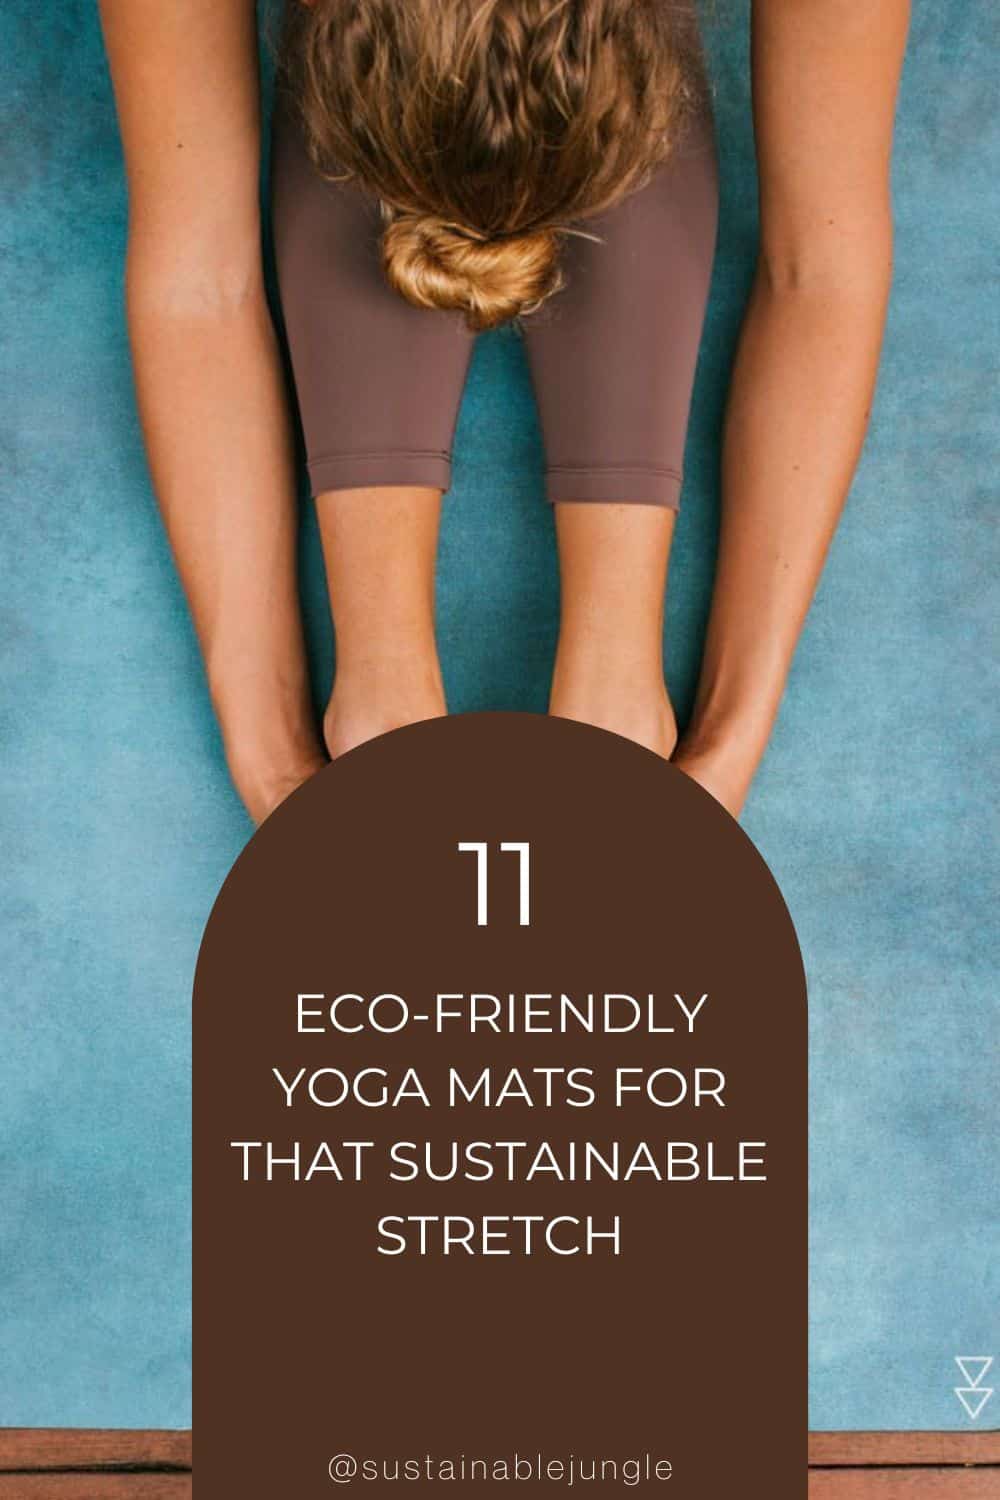 11 Eco-Friendly Yoga Mats For That Sustainable Stretch Image by Yoga Design Lab #ecofriendlyyogamats #ecoyogamats #bestecofriendlyyogamats #sustainableyogamats #yogamatsustainable #sustainablecorkyogamat #sustainablejungle